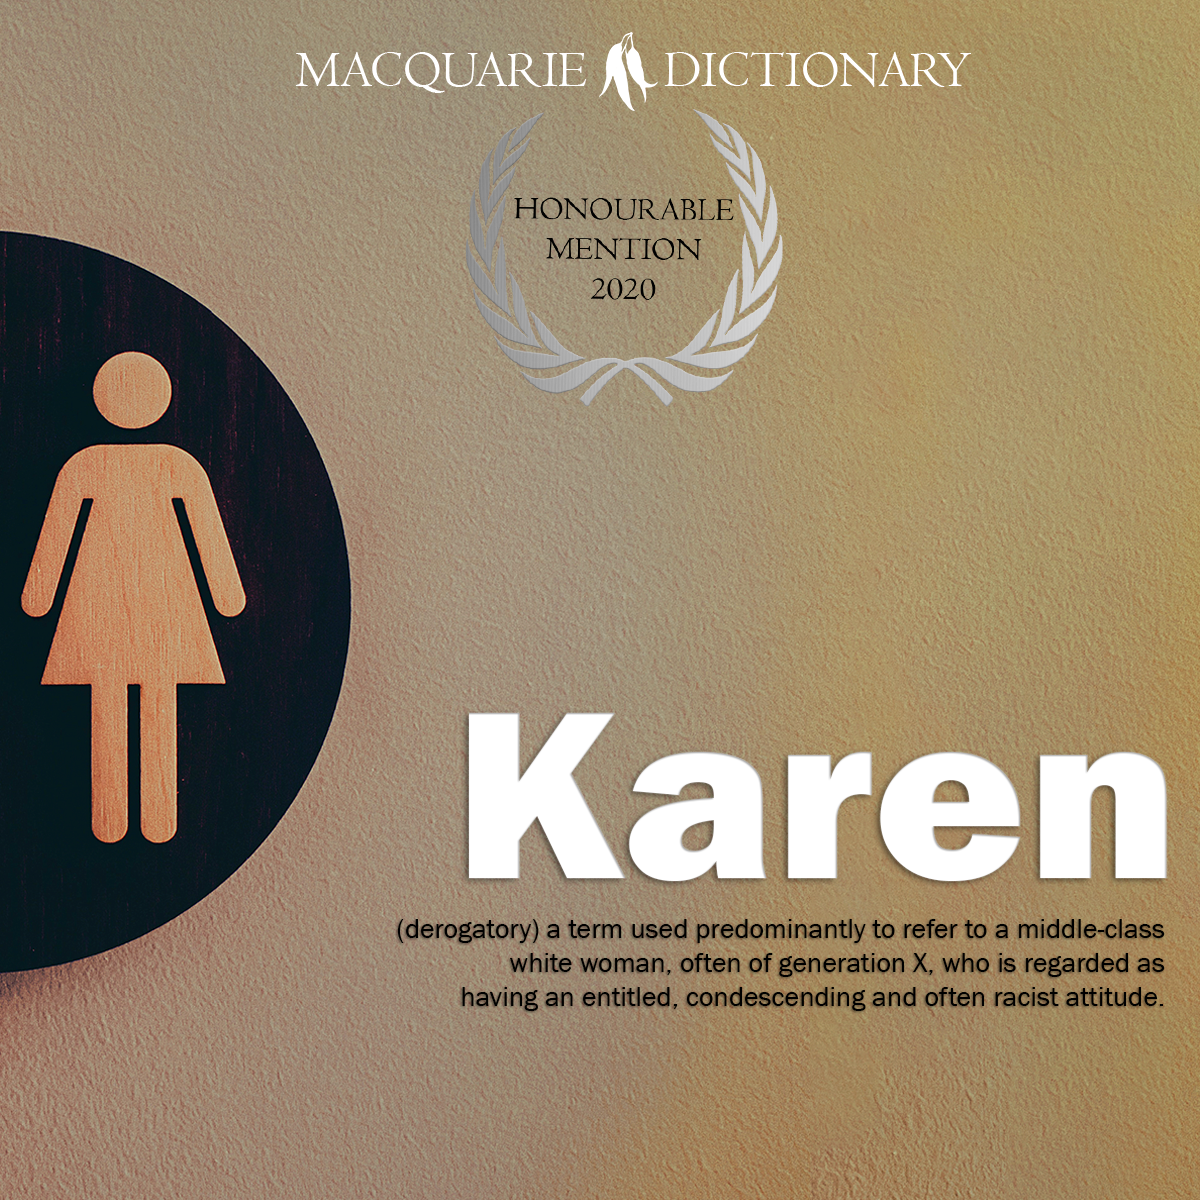 Karen - a term used predominantly to refer to a middle-class white woman, often of generation X, who is regarded as having an entitled, condescending and often racist attitude.